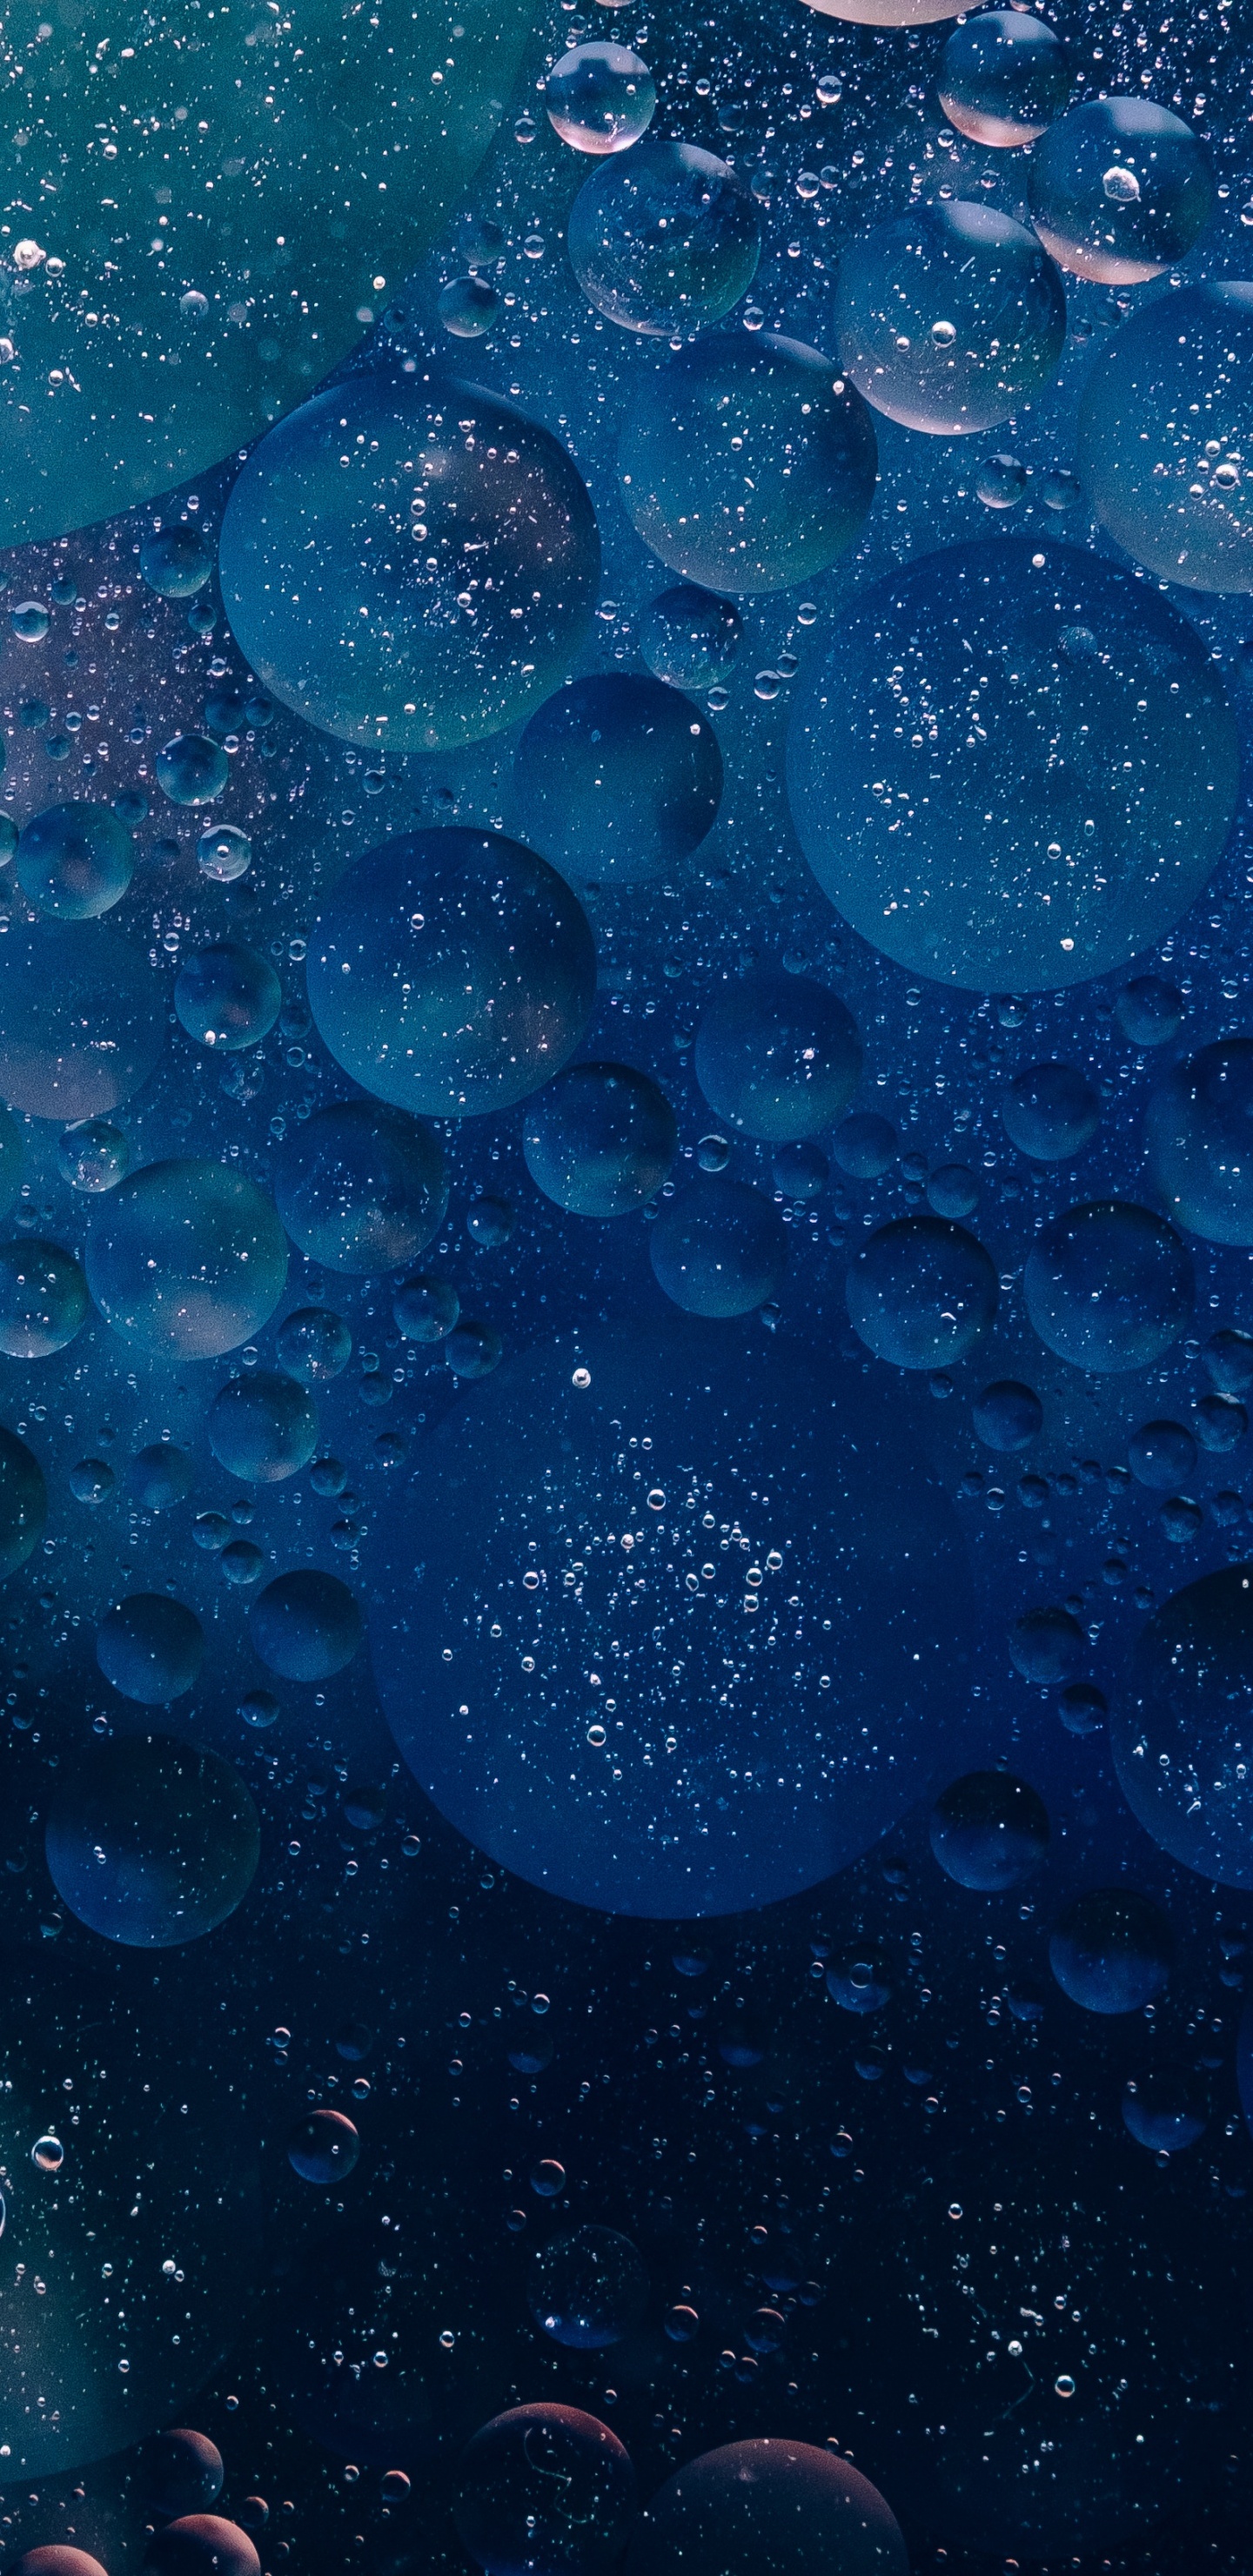 Water Droplets on Glass Panel. Wallpaper in 1440x2960 Resolution